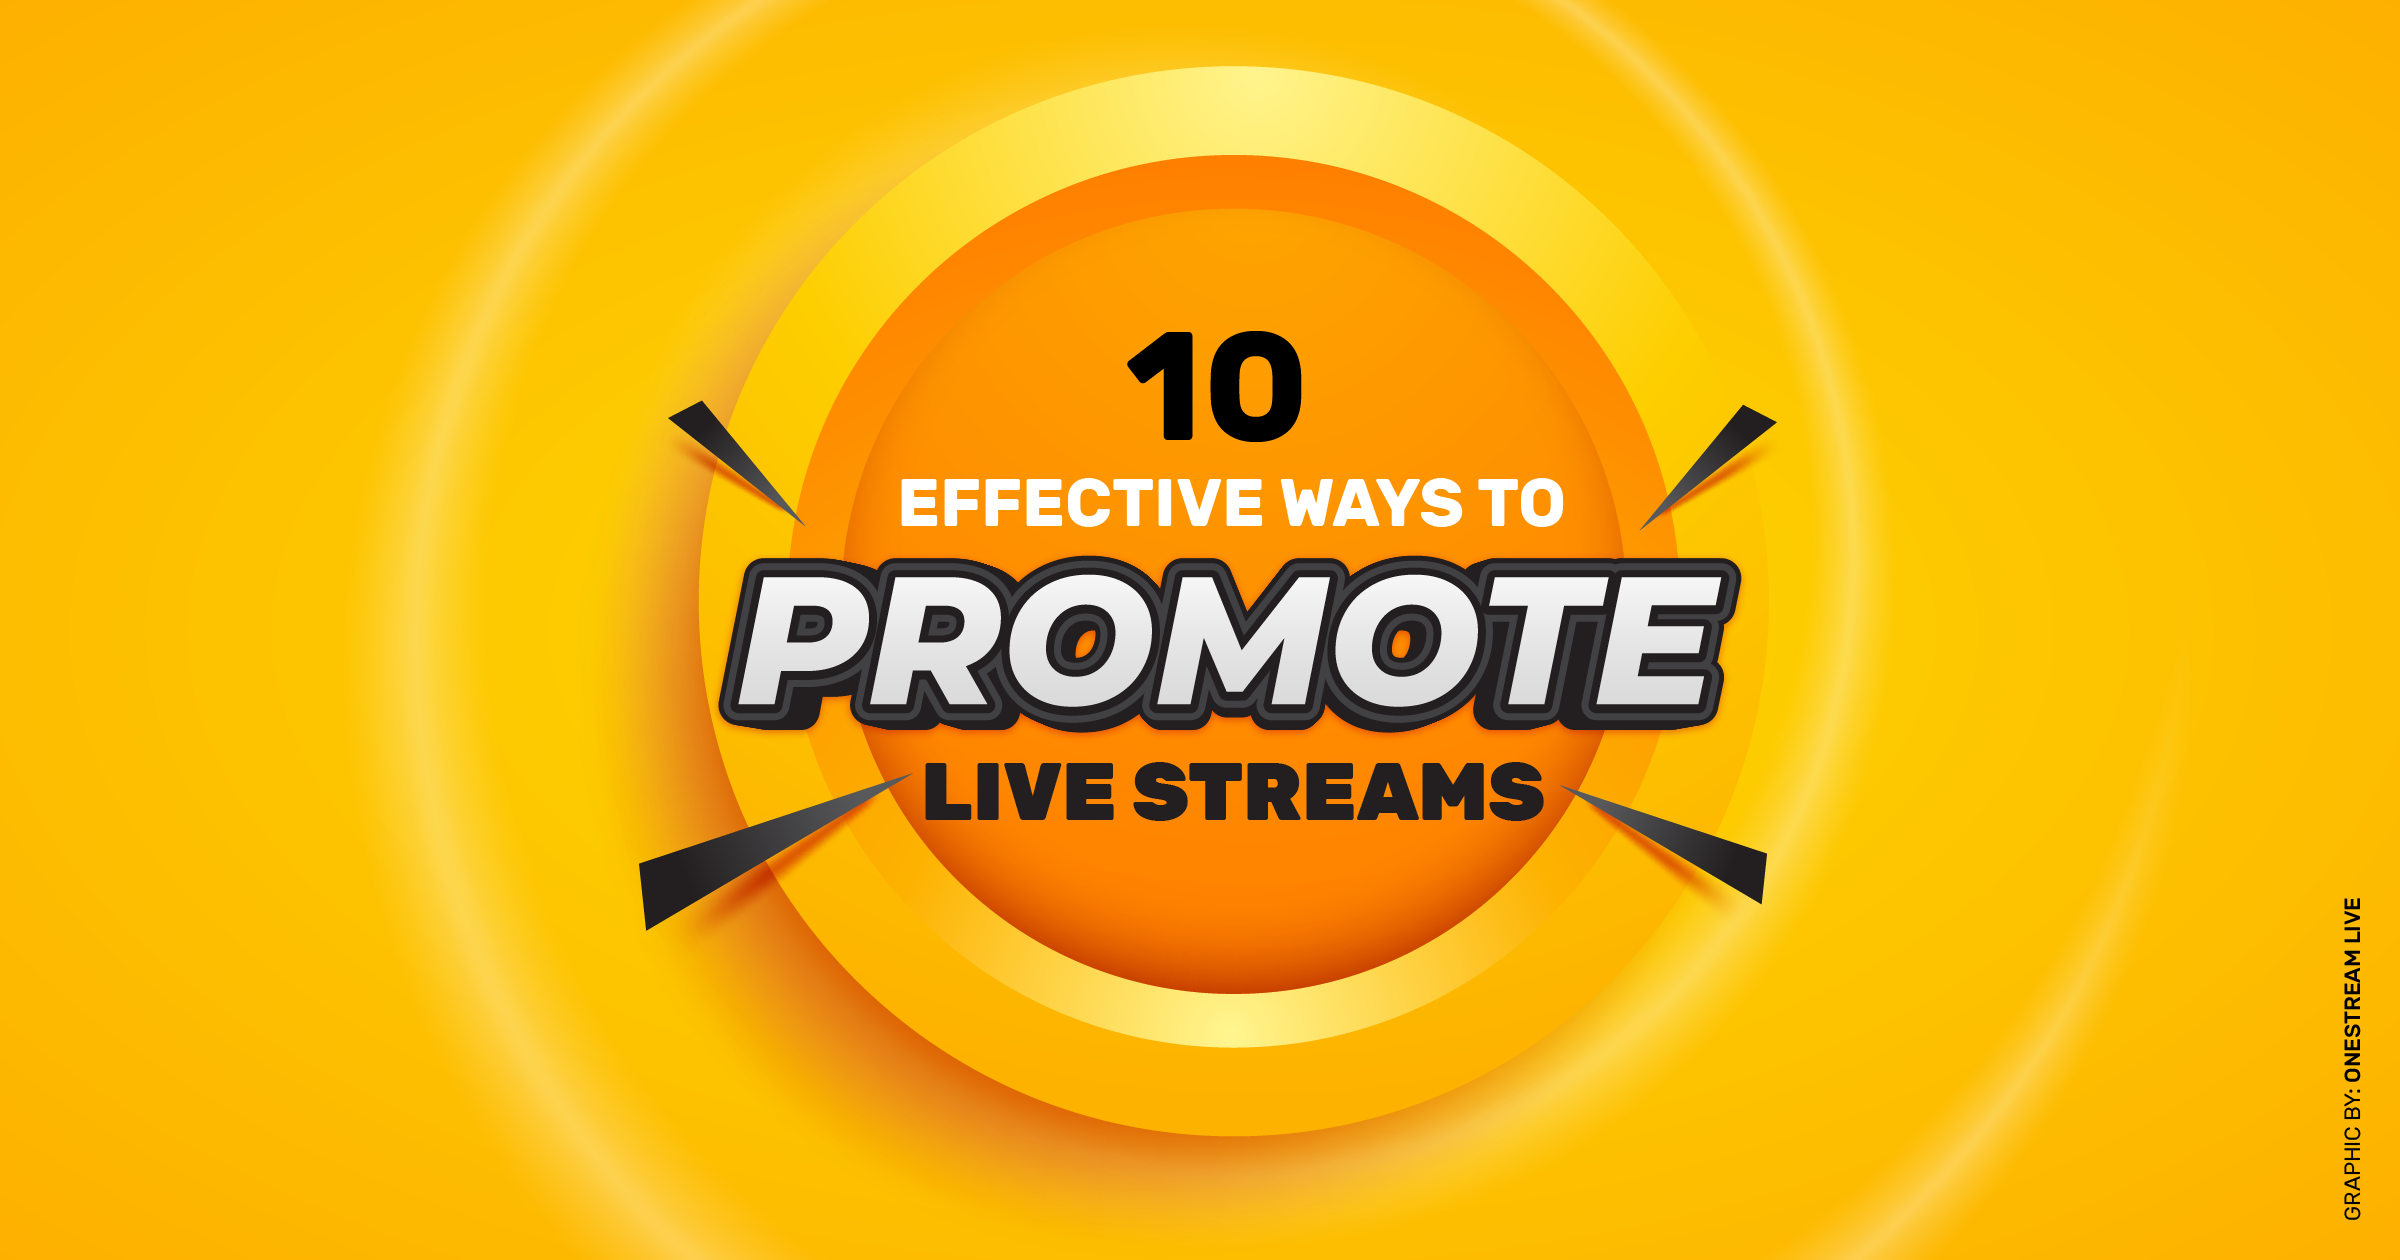 10 Effective Ways to Promote your Live Streams